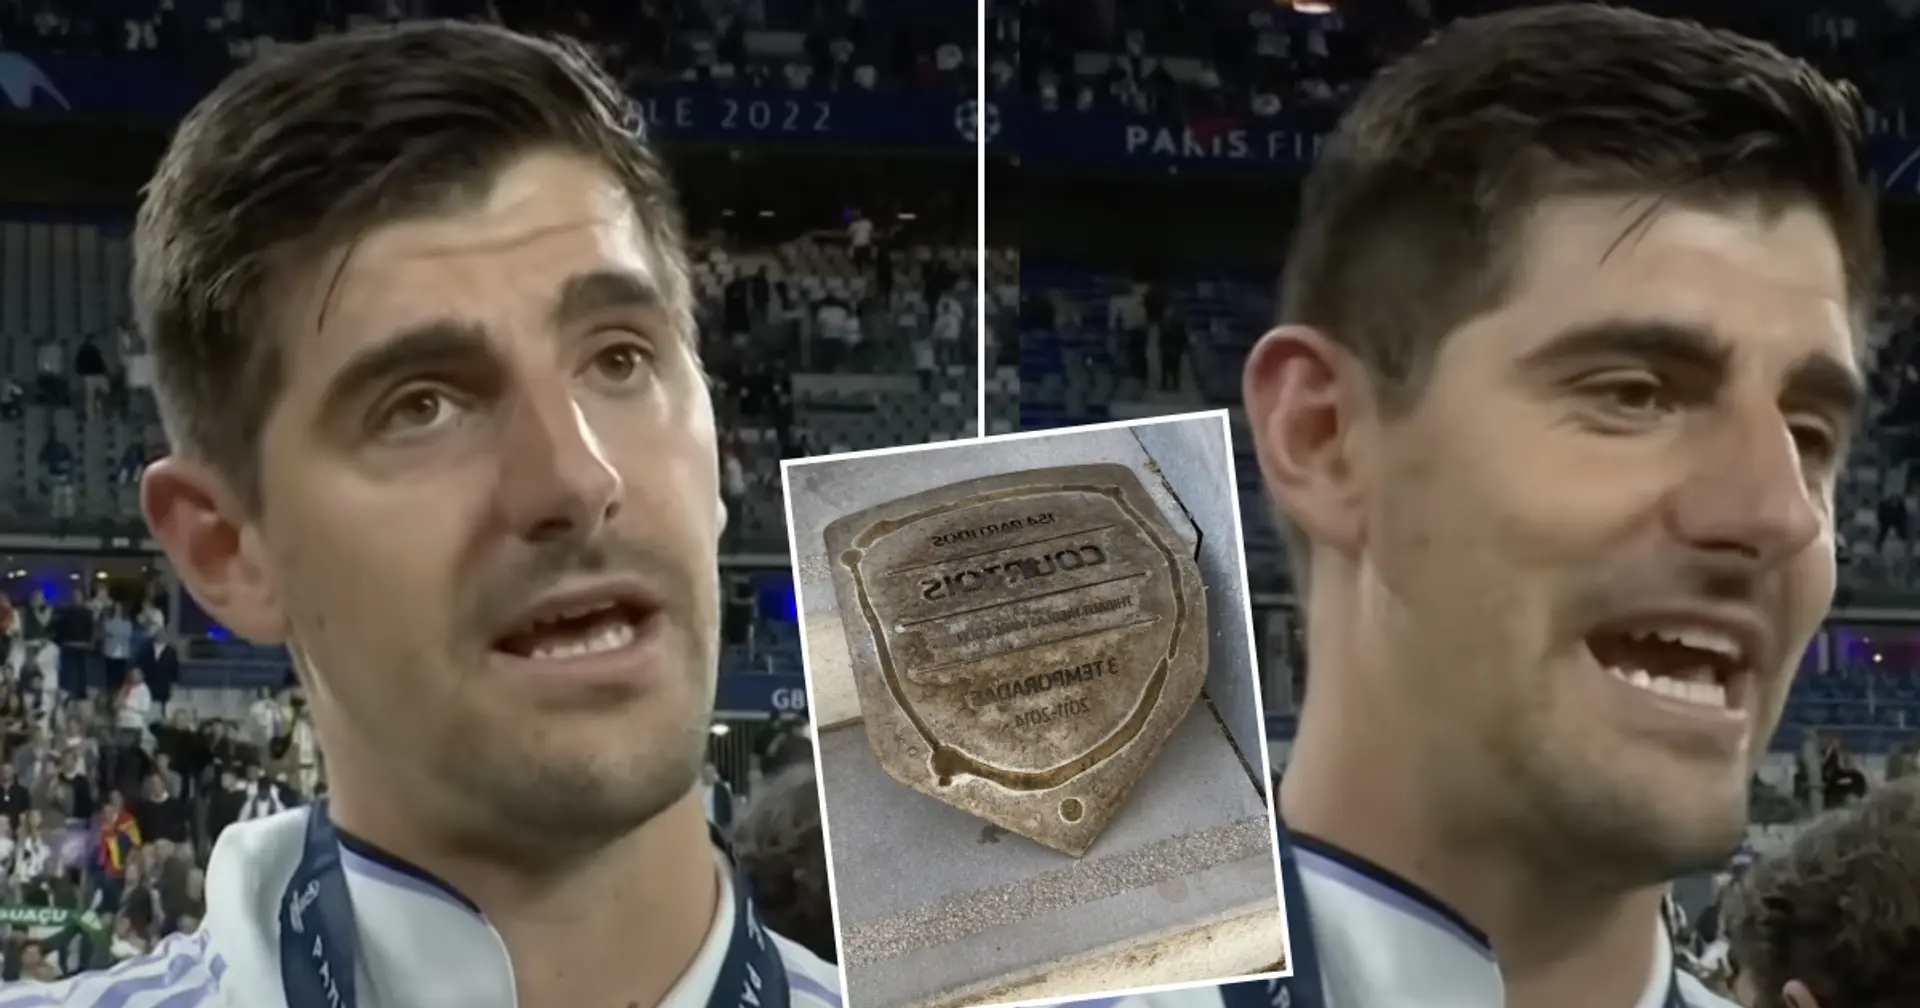 Atletico threaten to remove Courtois' plaque if he doesn't apologise - Thibaut's stance revealed